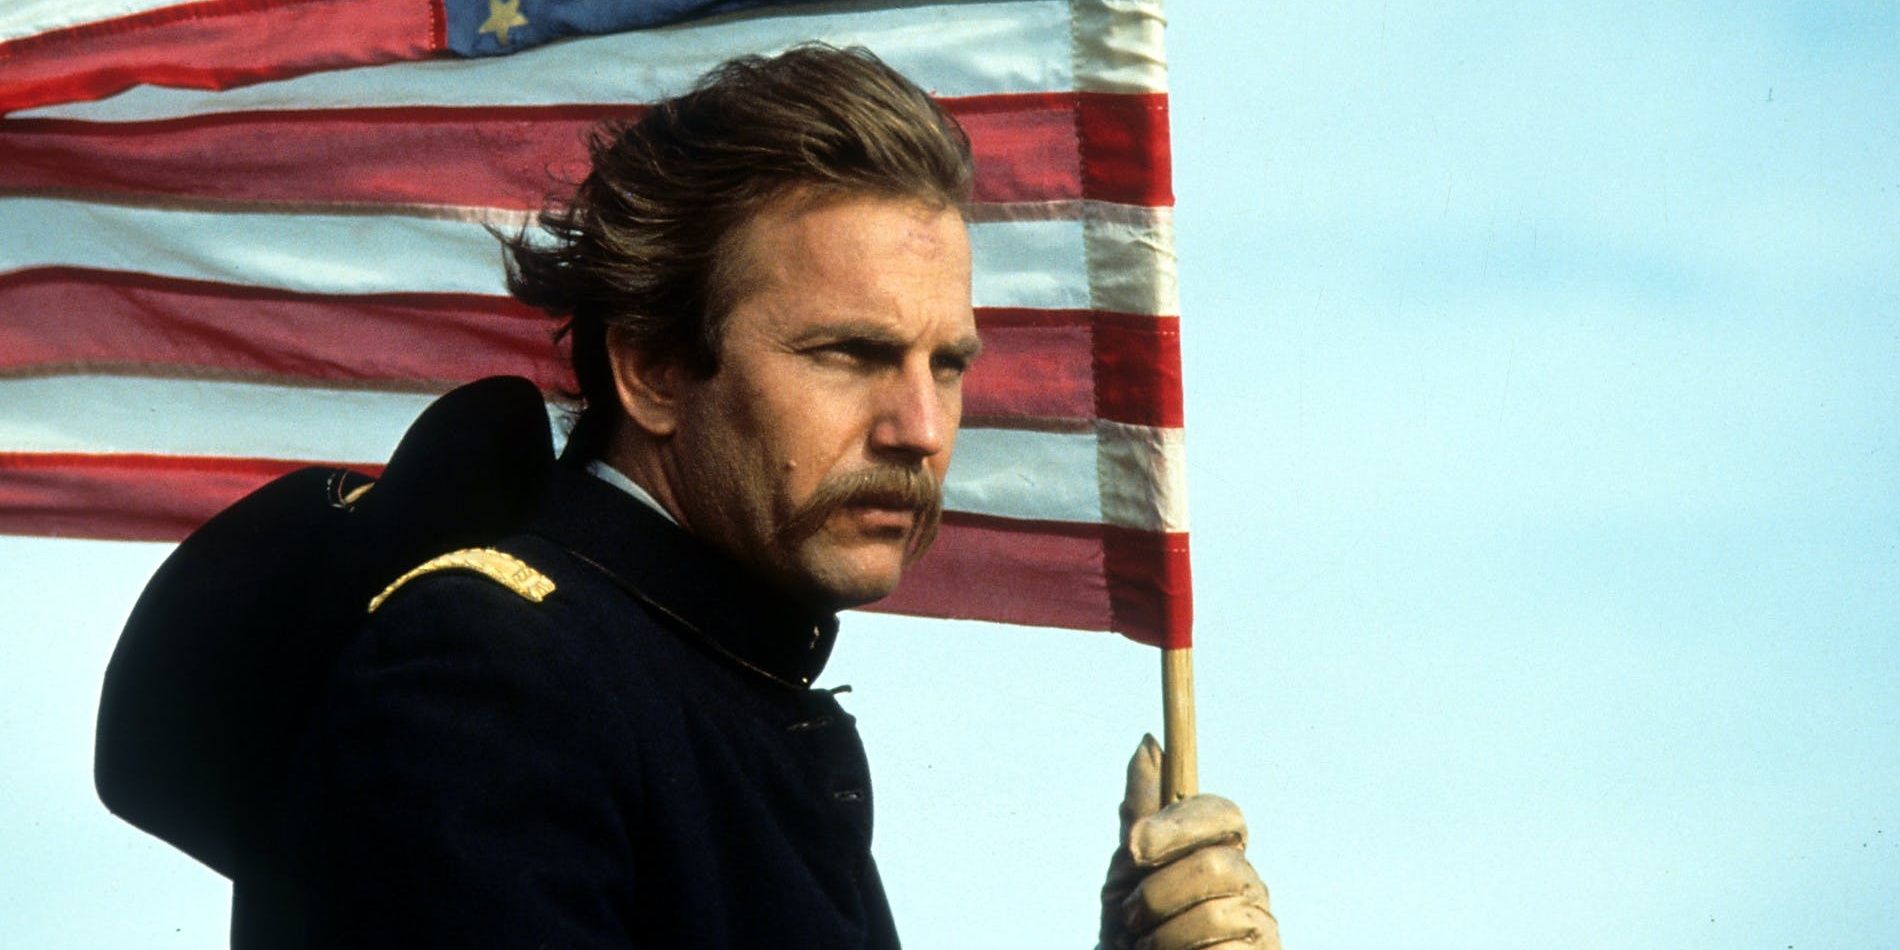 Kevin Costner holds an American flag in Dances with Wolves